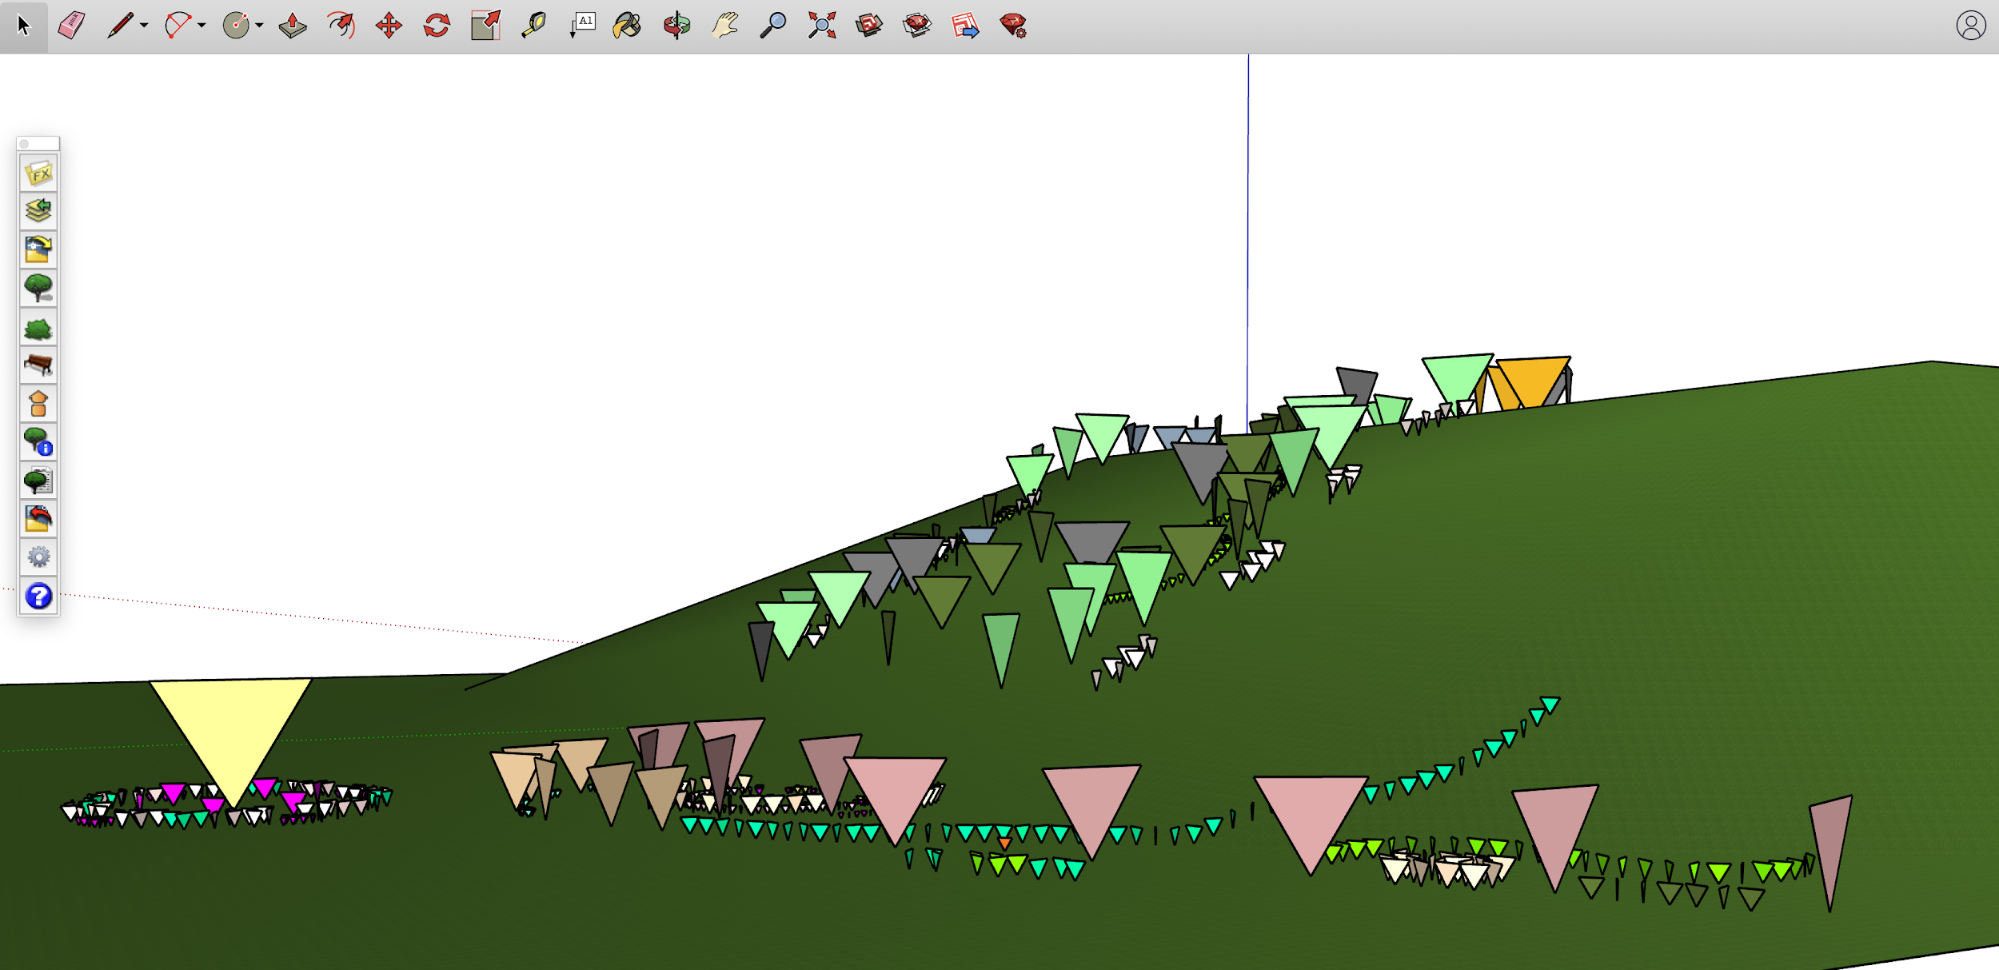 Plants all place at elevation as uniquely colored nodes on the default layer